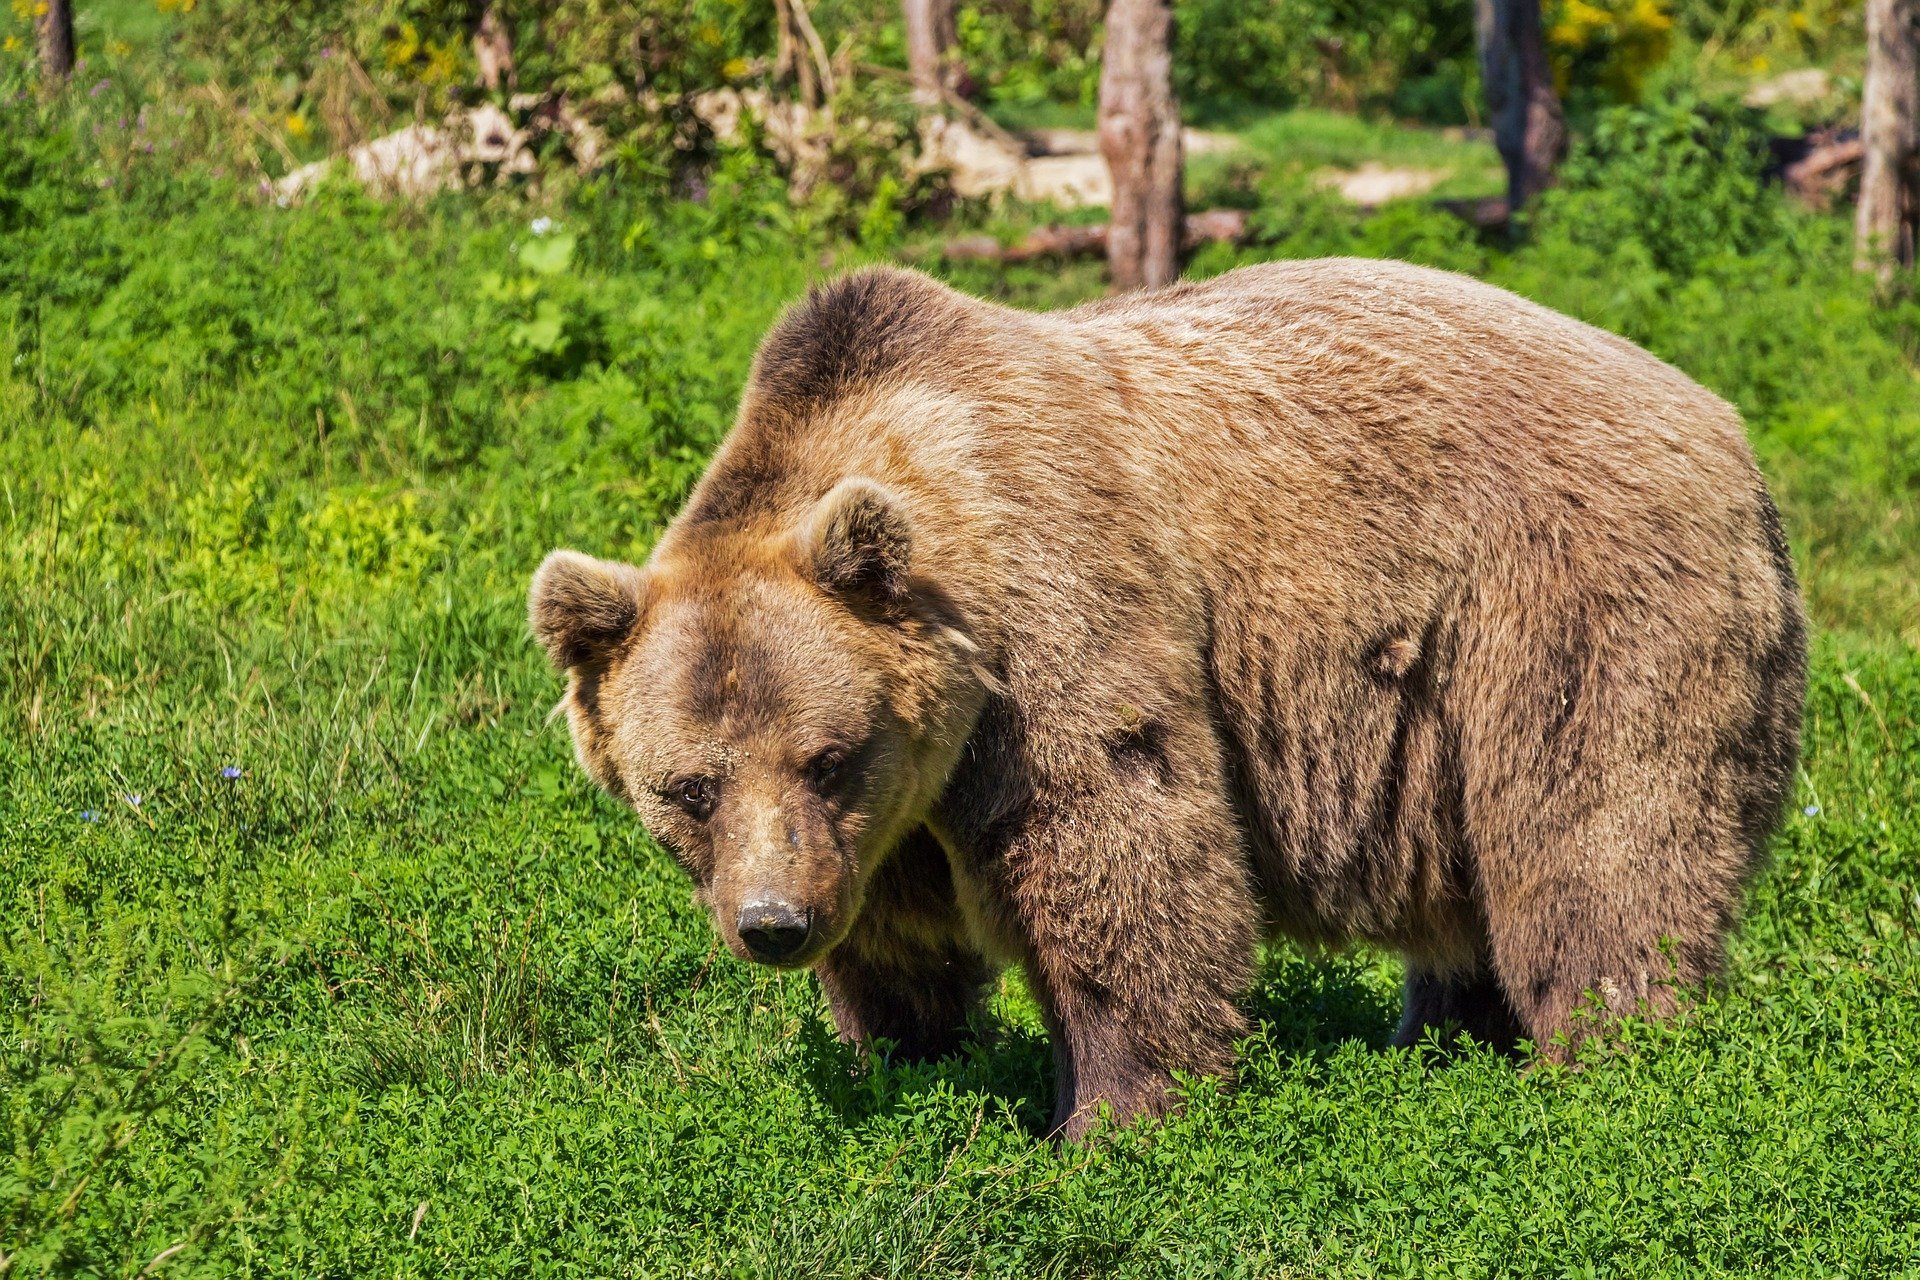 Grizzly bear out in the wild. | Source: Pixabay